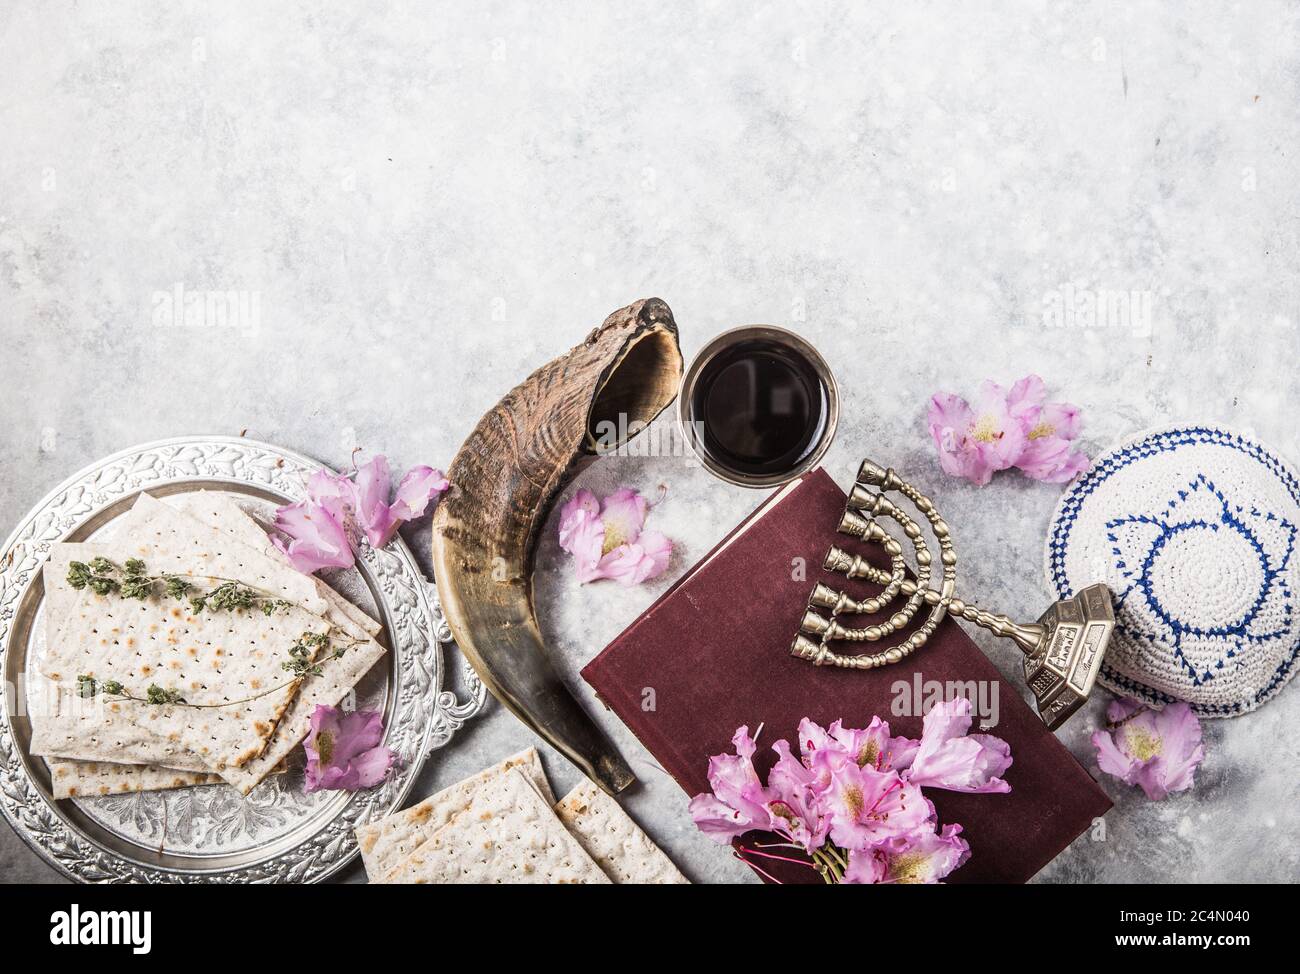 Metal plate with matzah or matza, Kiddush Cup, Shofar horn  on a light  background presented as a Passover seder feast or meal with copy space. Jewish Stock Photo